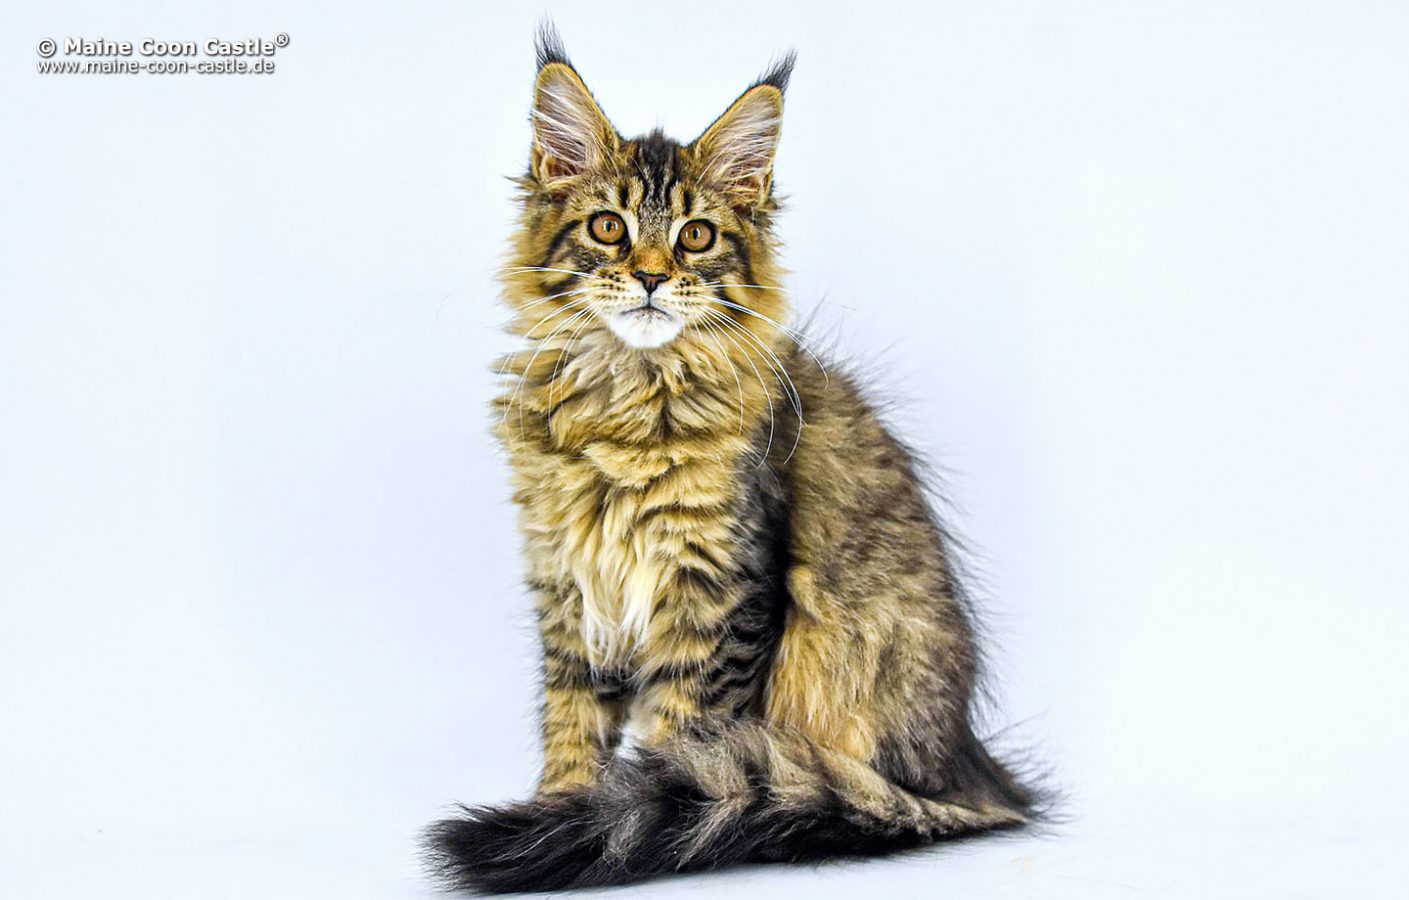 Gina of Maine Coon Castle